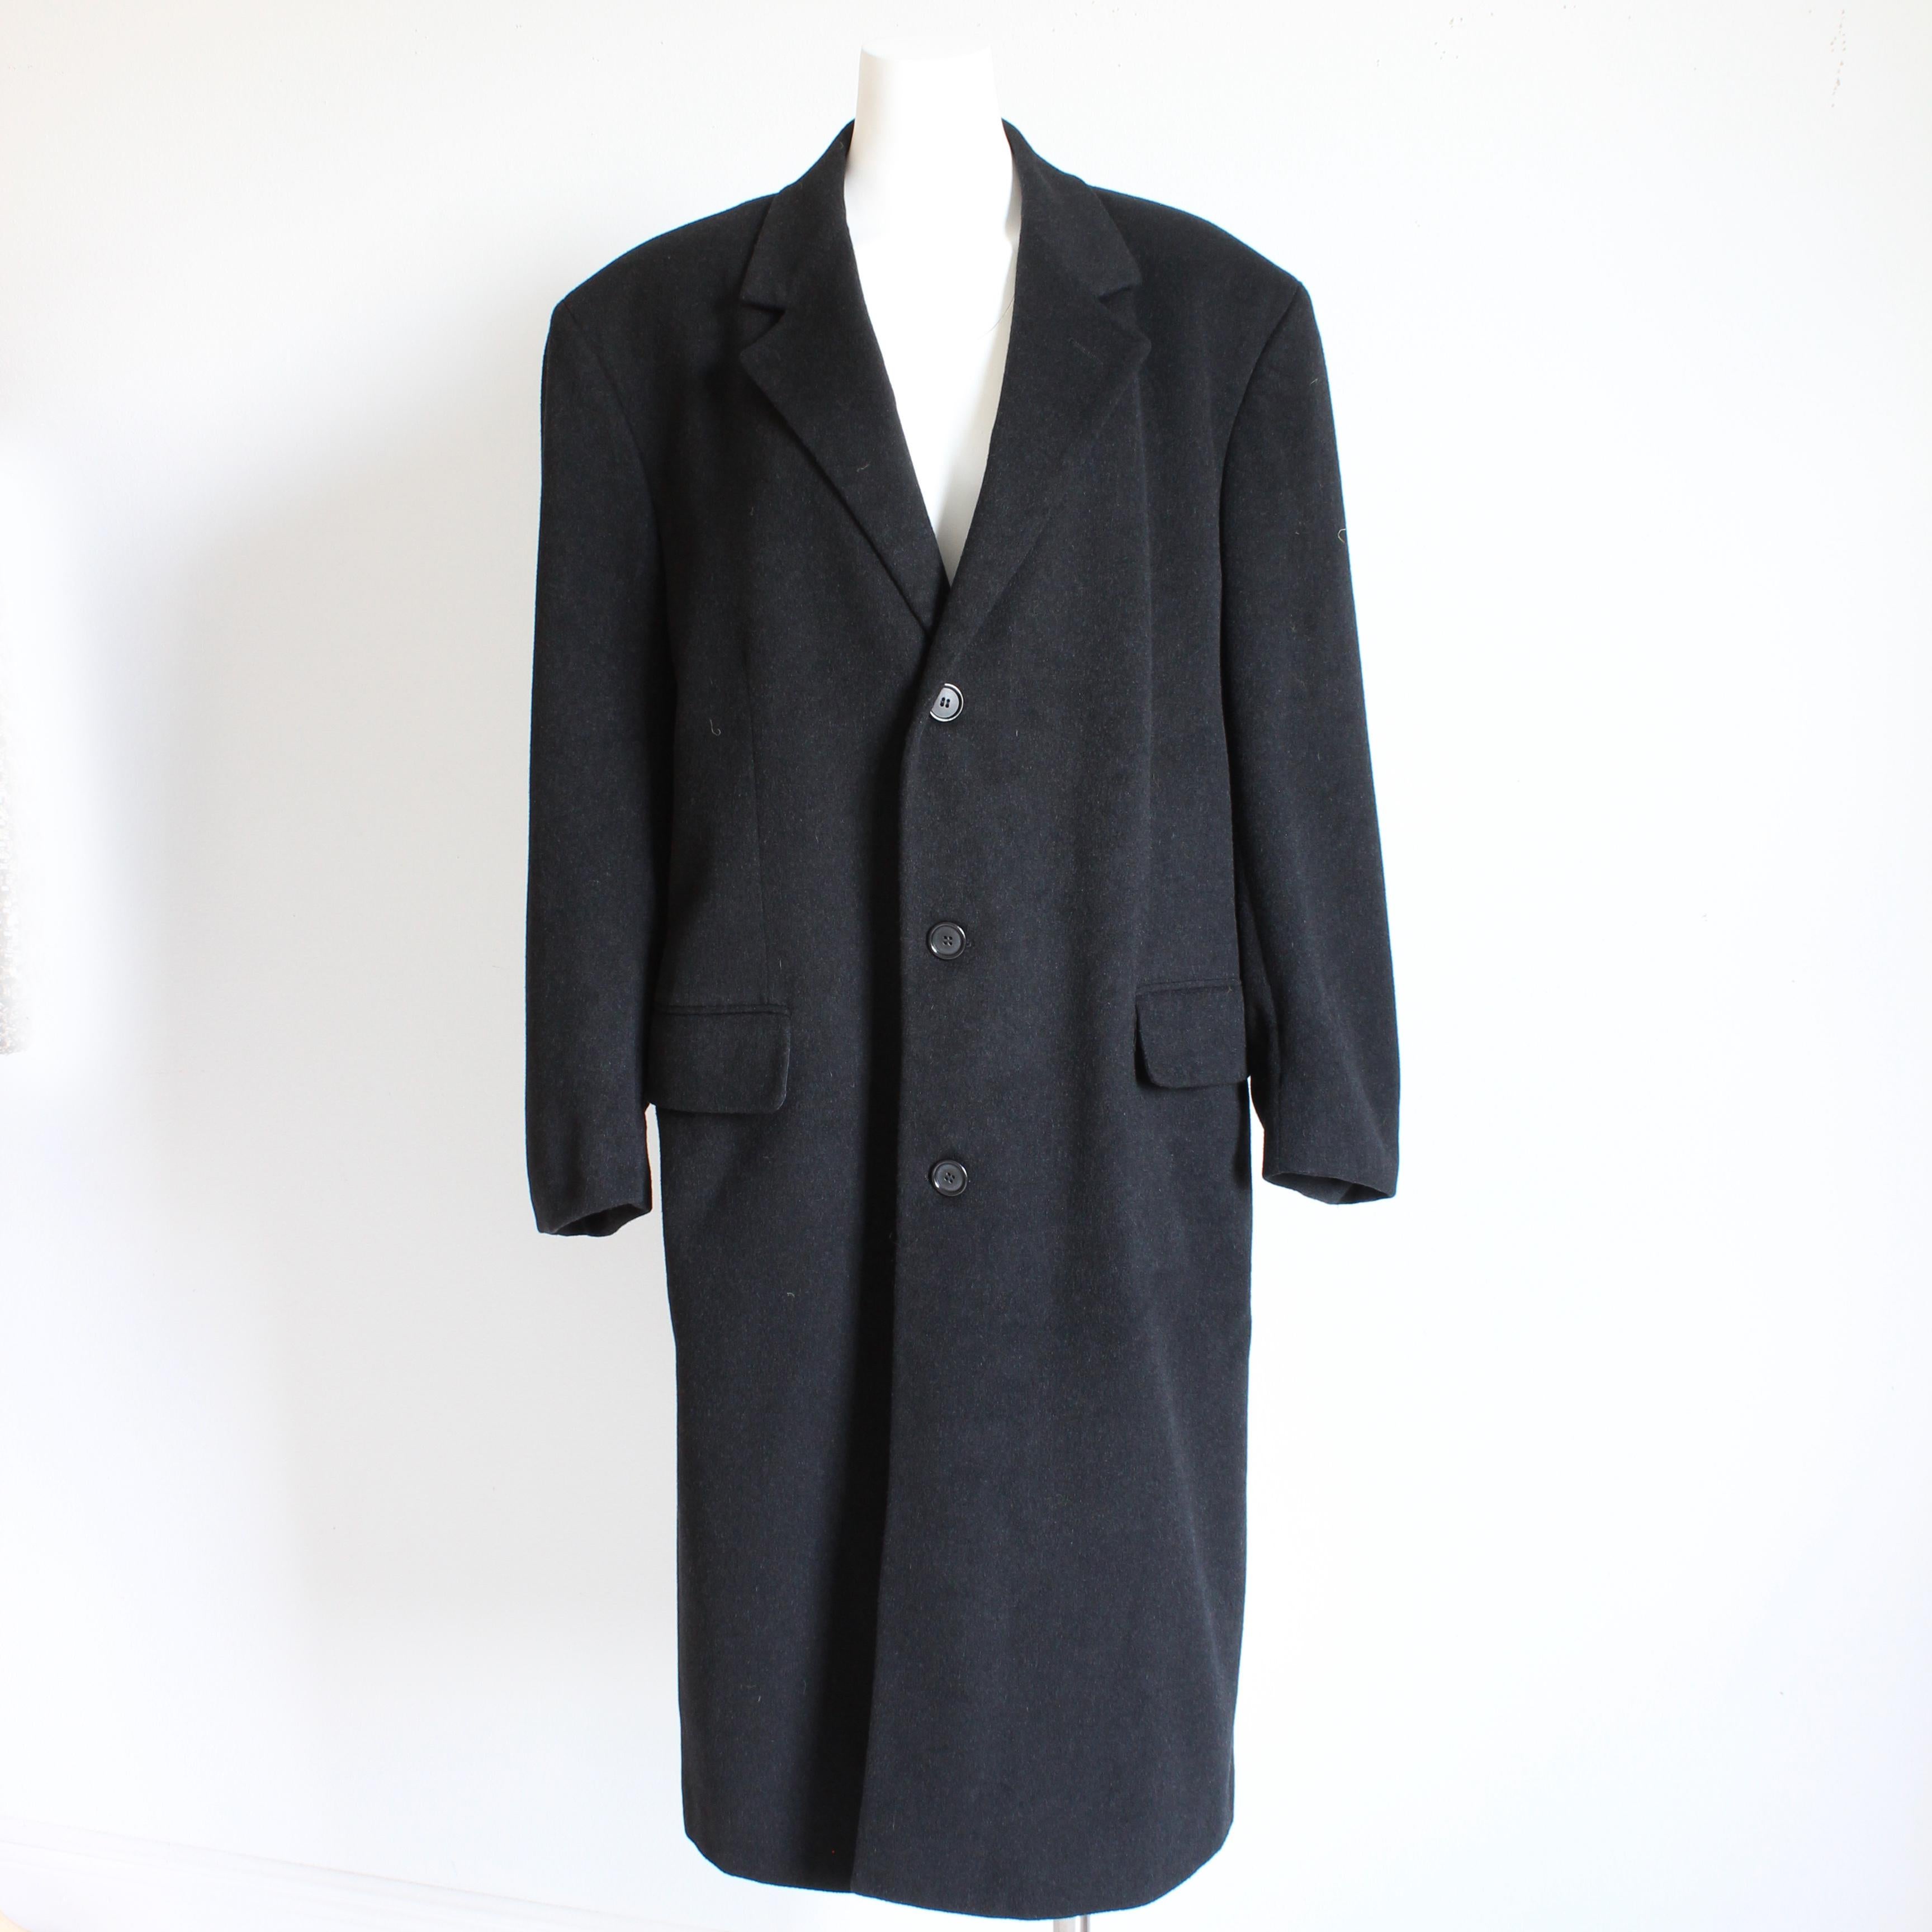 Authentic, preowned, vintage Bill Blass Black Label Cashmere Blend coat, likely made in the 90s. Made from a black cashmere wool blend, it features classic styling and construction with flap pockets at each hip.   Iconic styling and quality